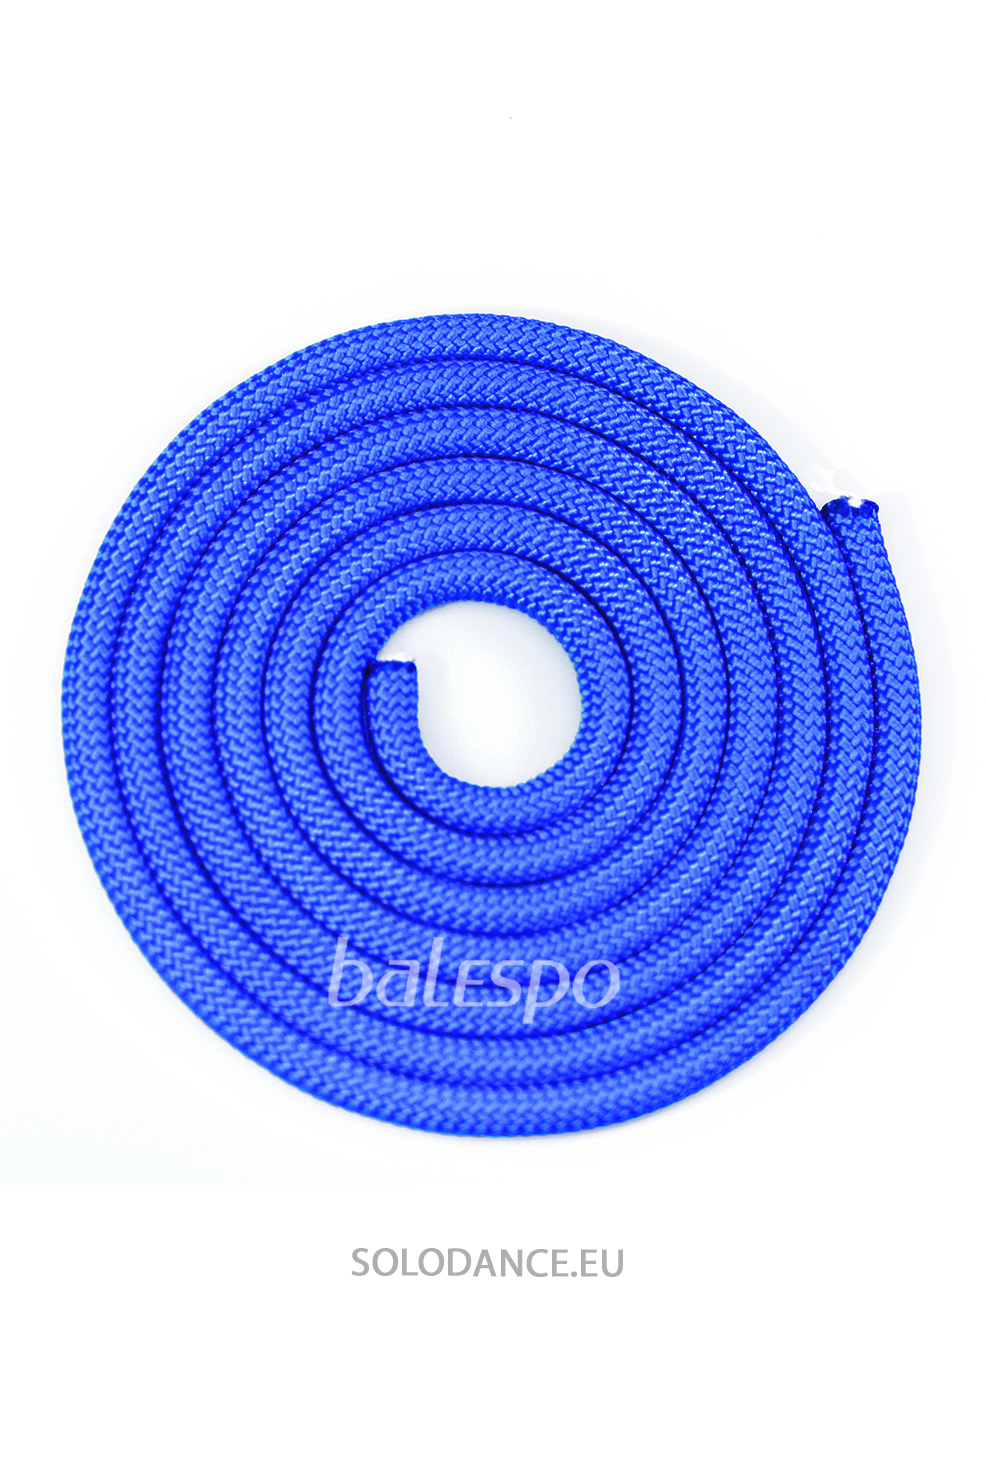 Gymnastic rope BALESPO red 3 m